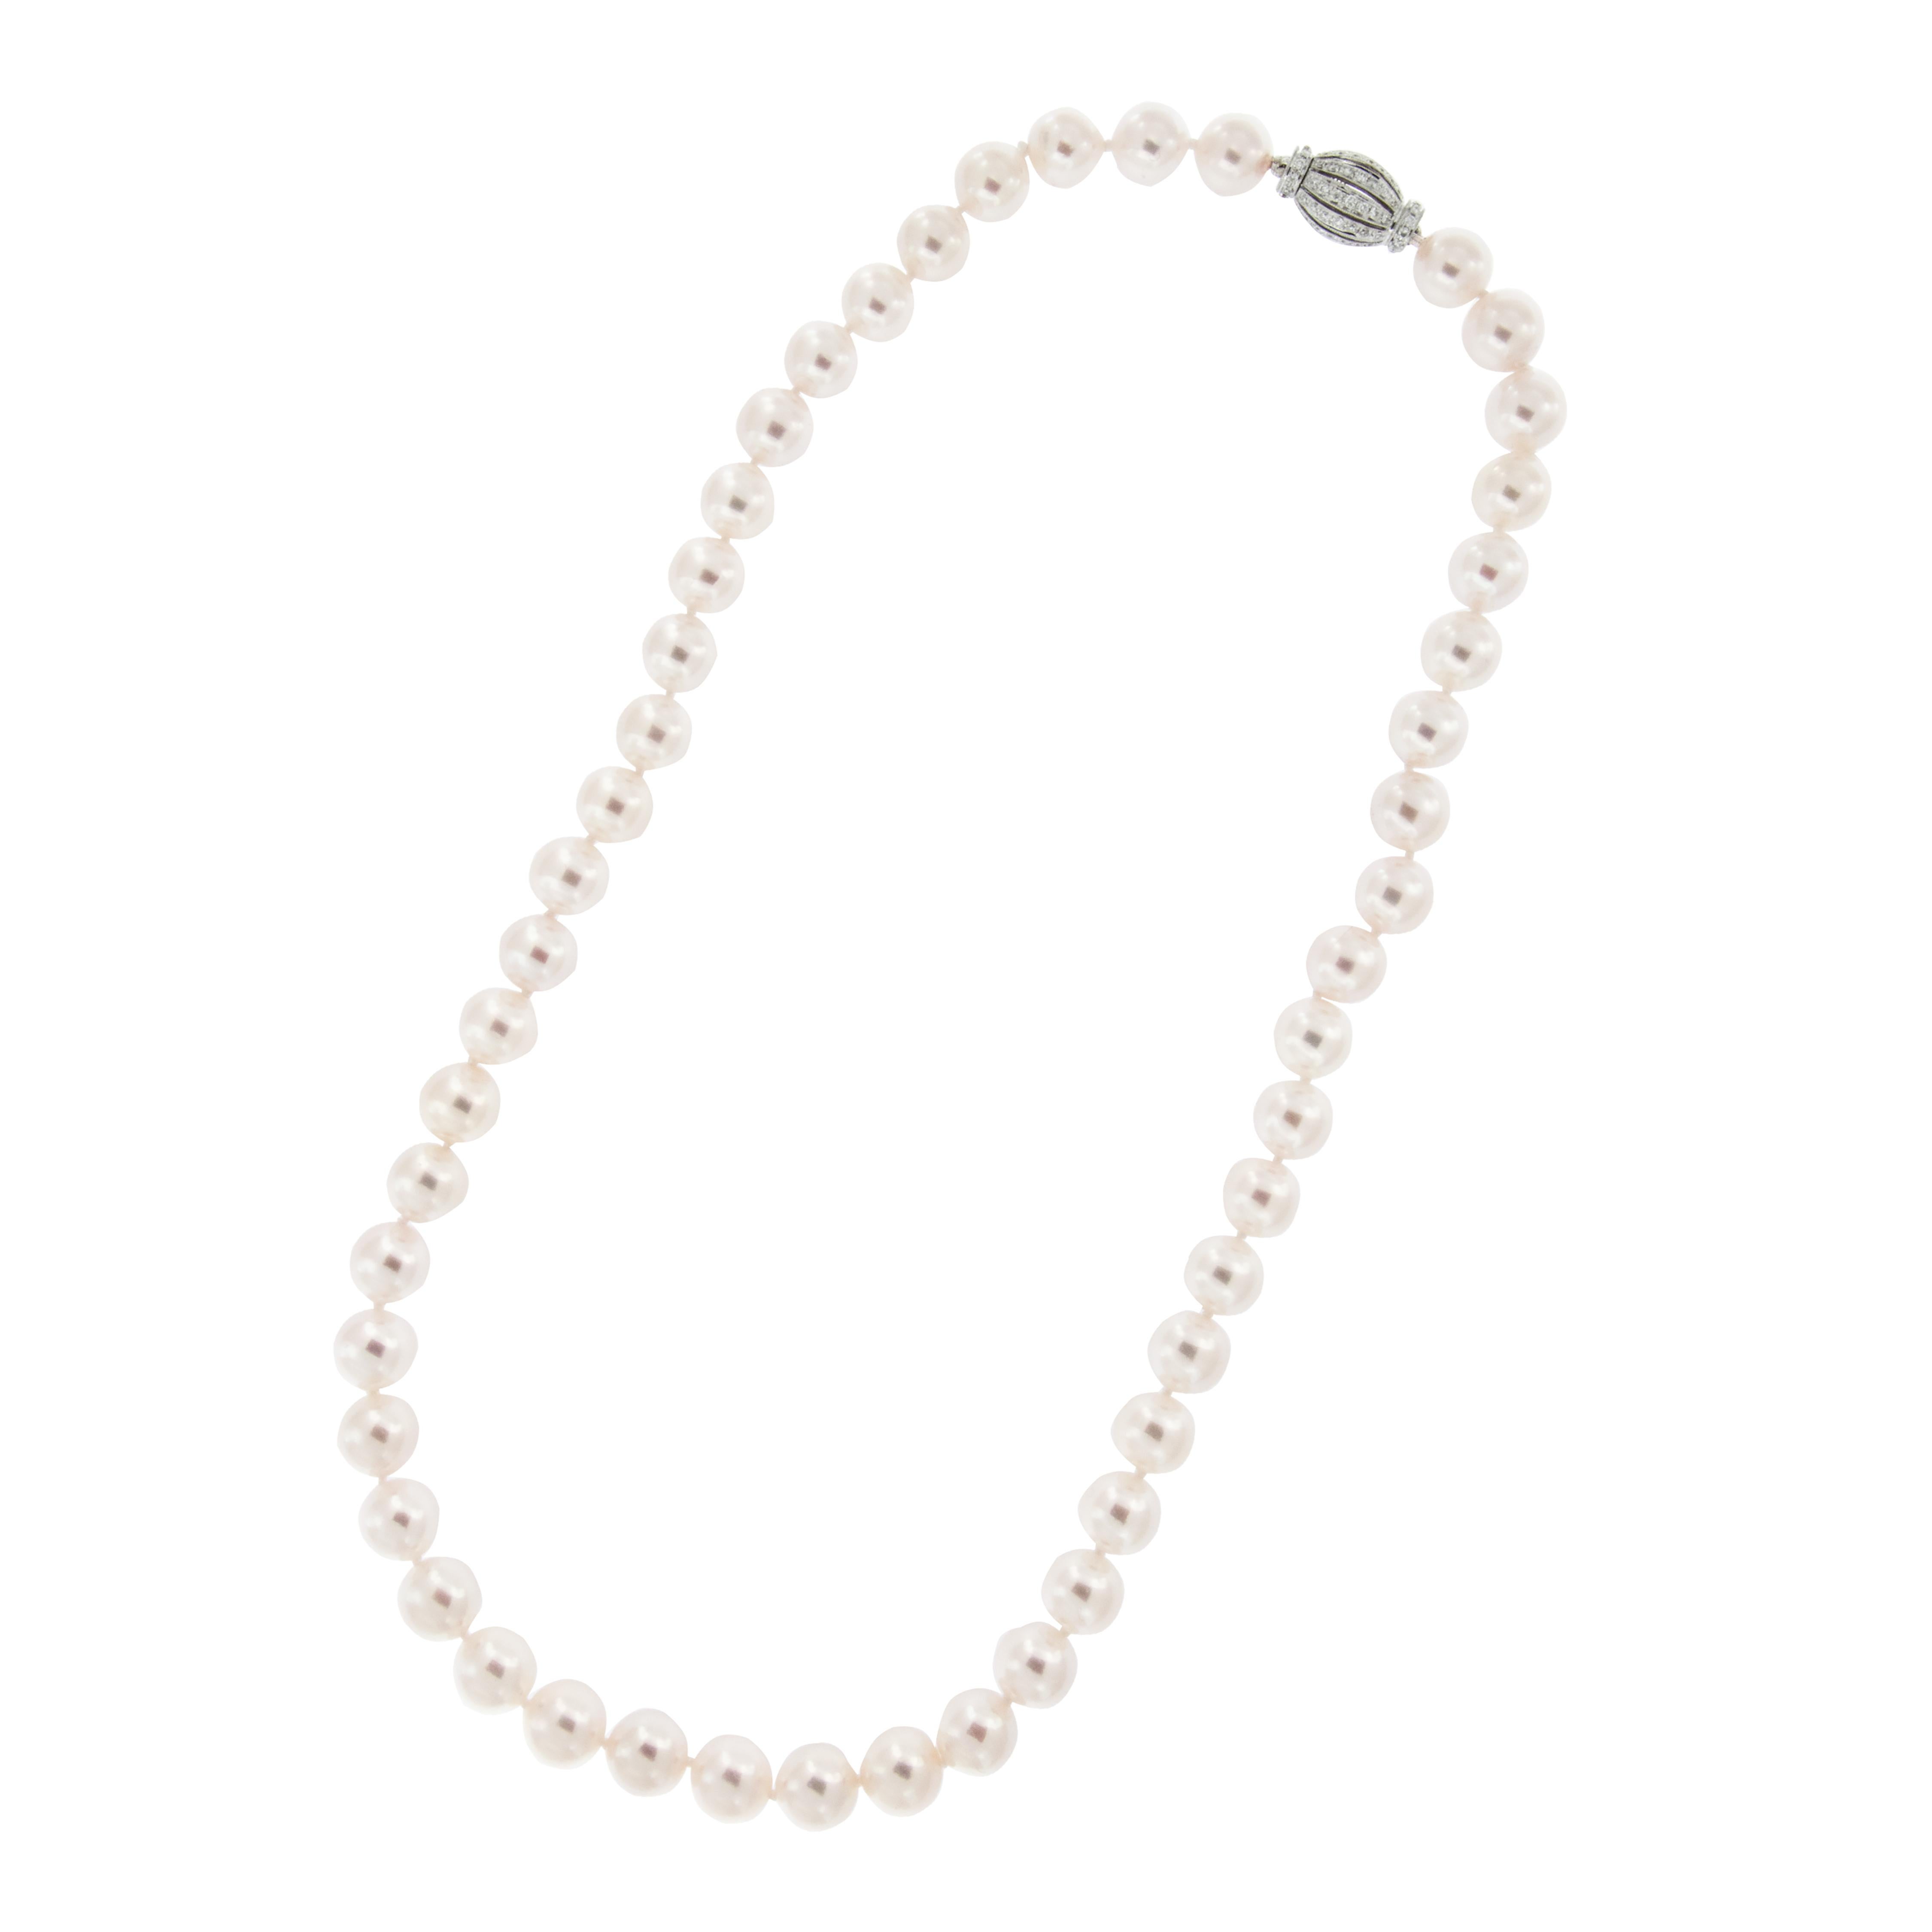 Classic with an extra touch fit for a Princess! This gorgeous Japanese AA Akoya pearl necklace is 18